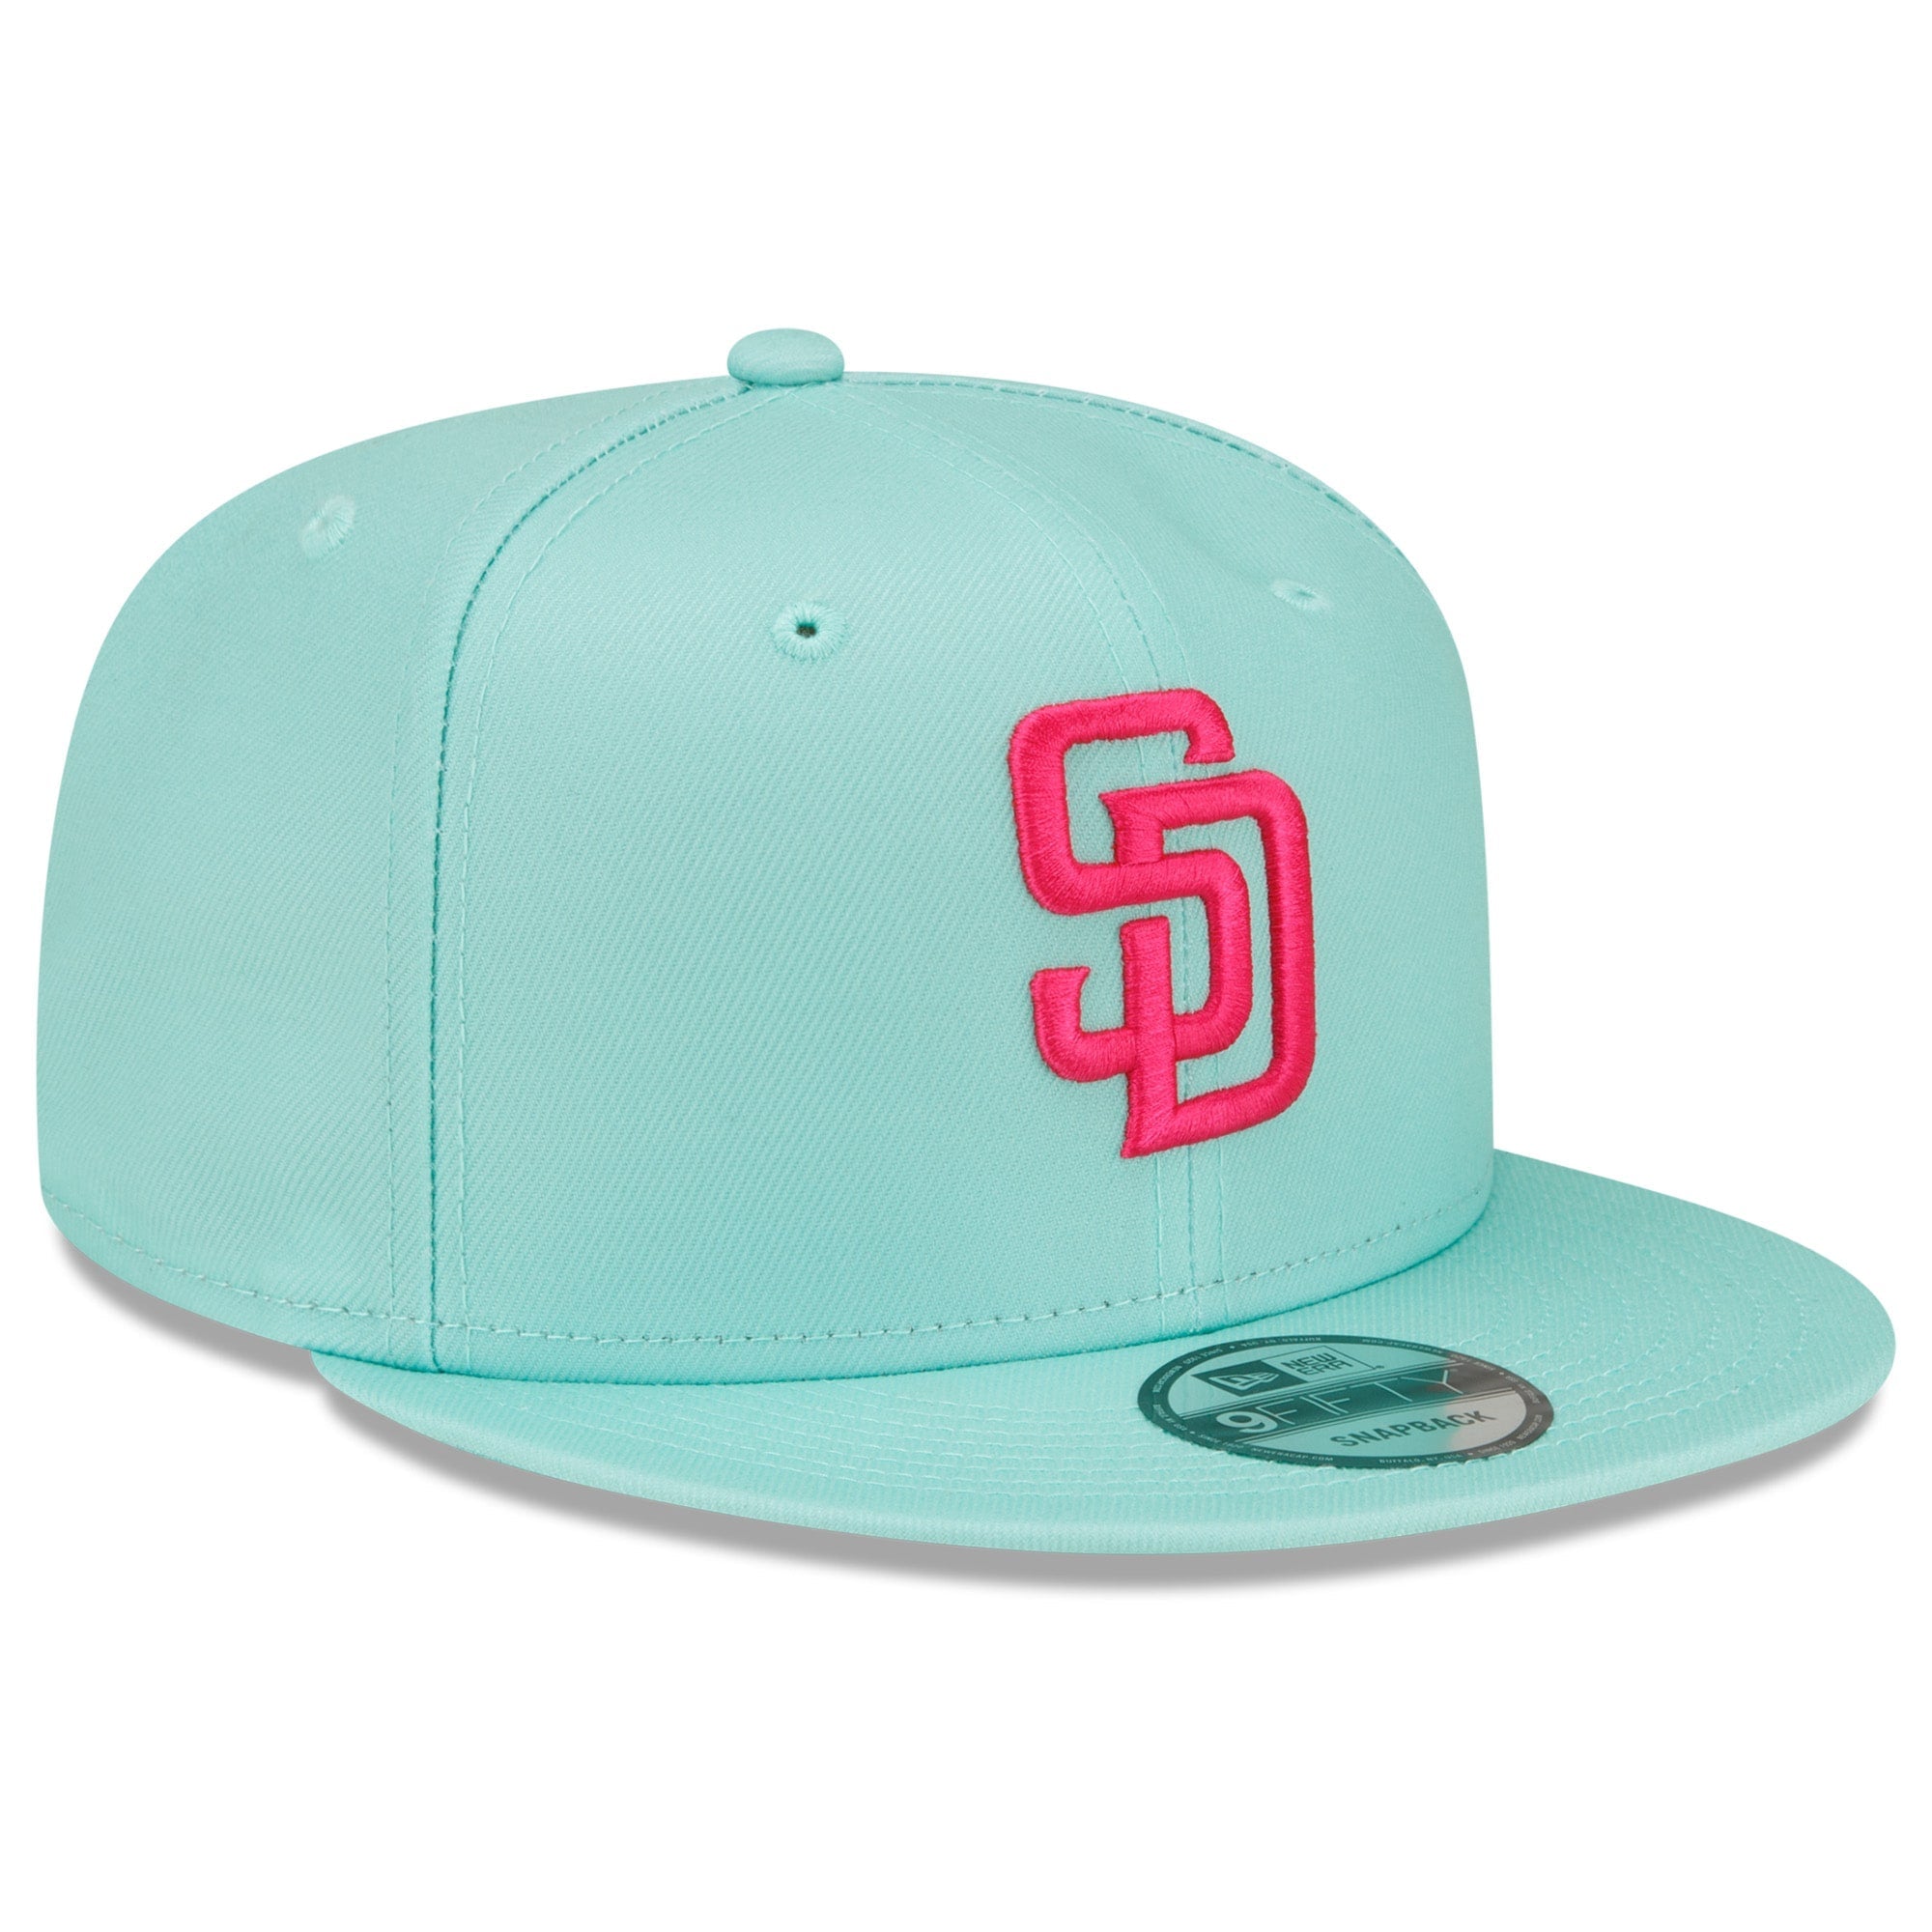 New Era San Diego Padres City Connect 9FIFTY Snapback Adjustable Hat